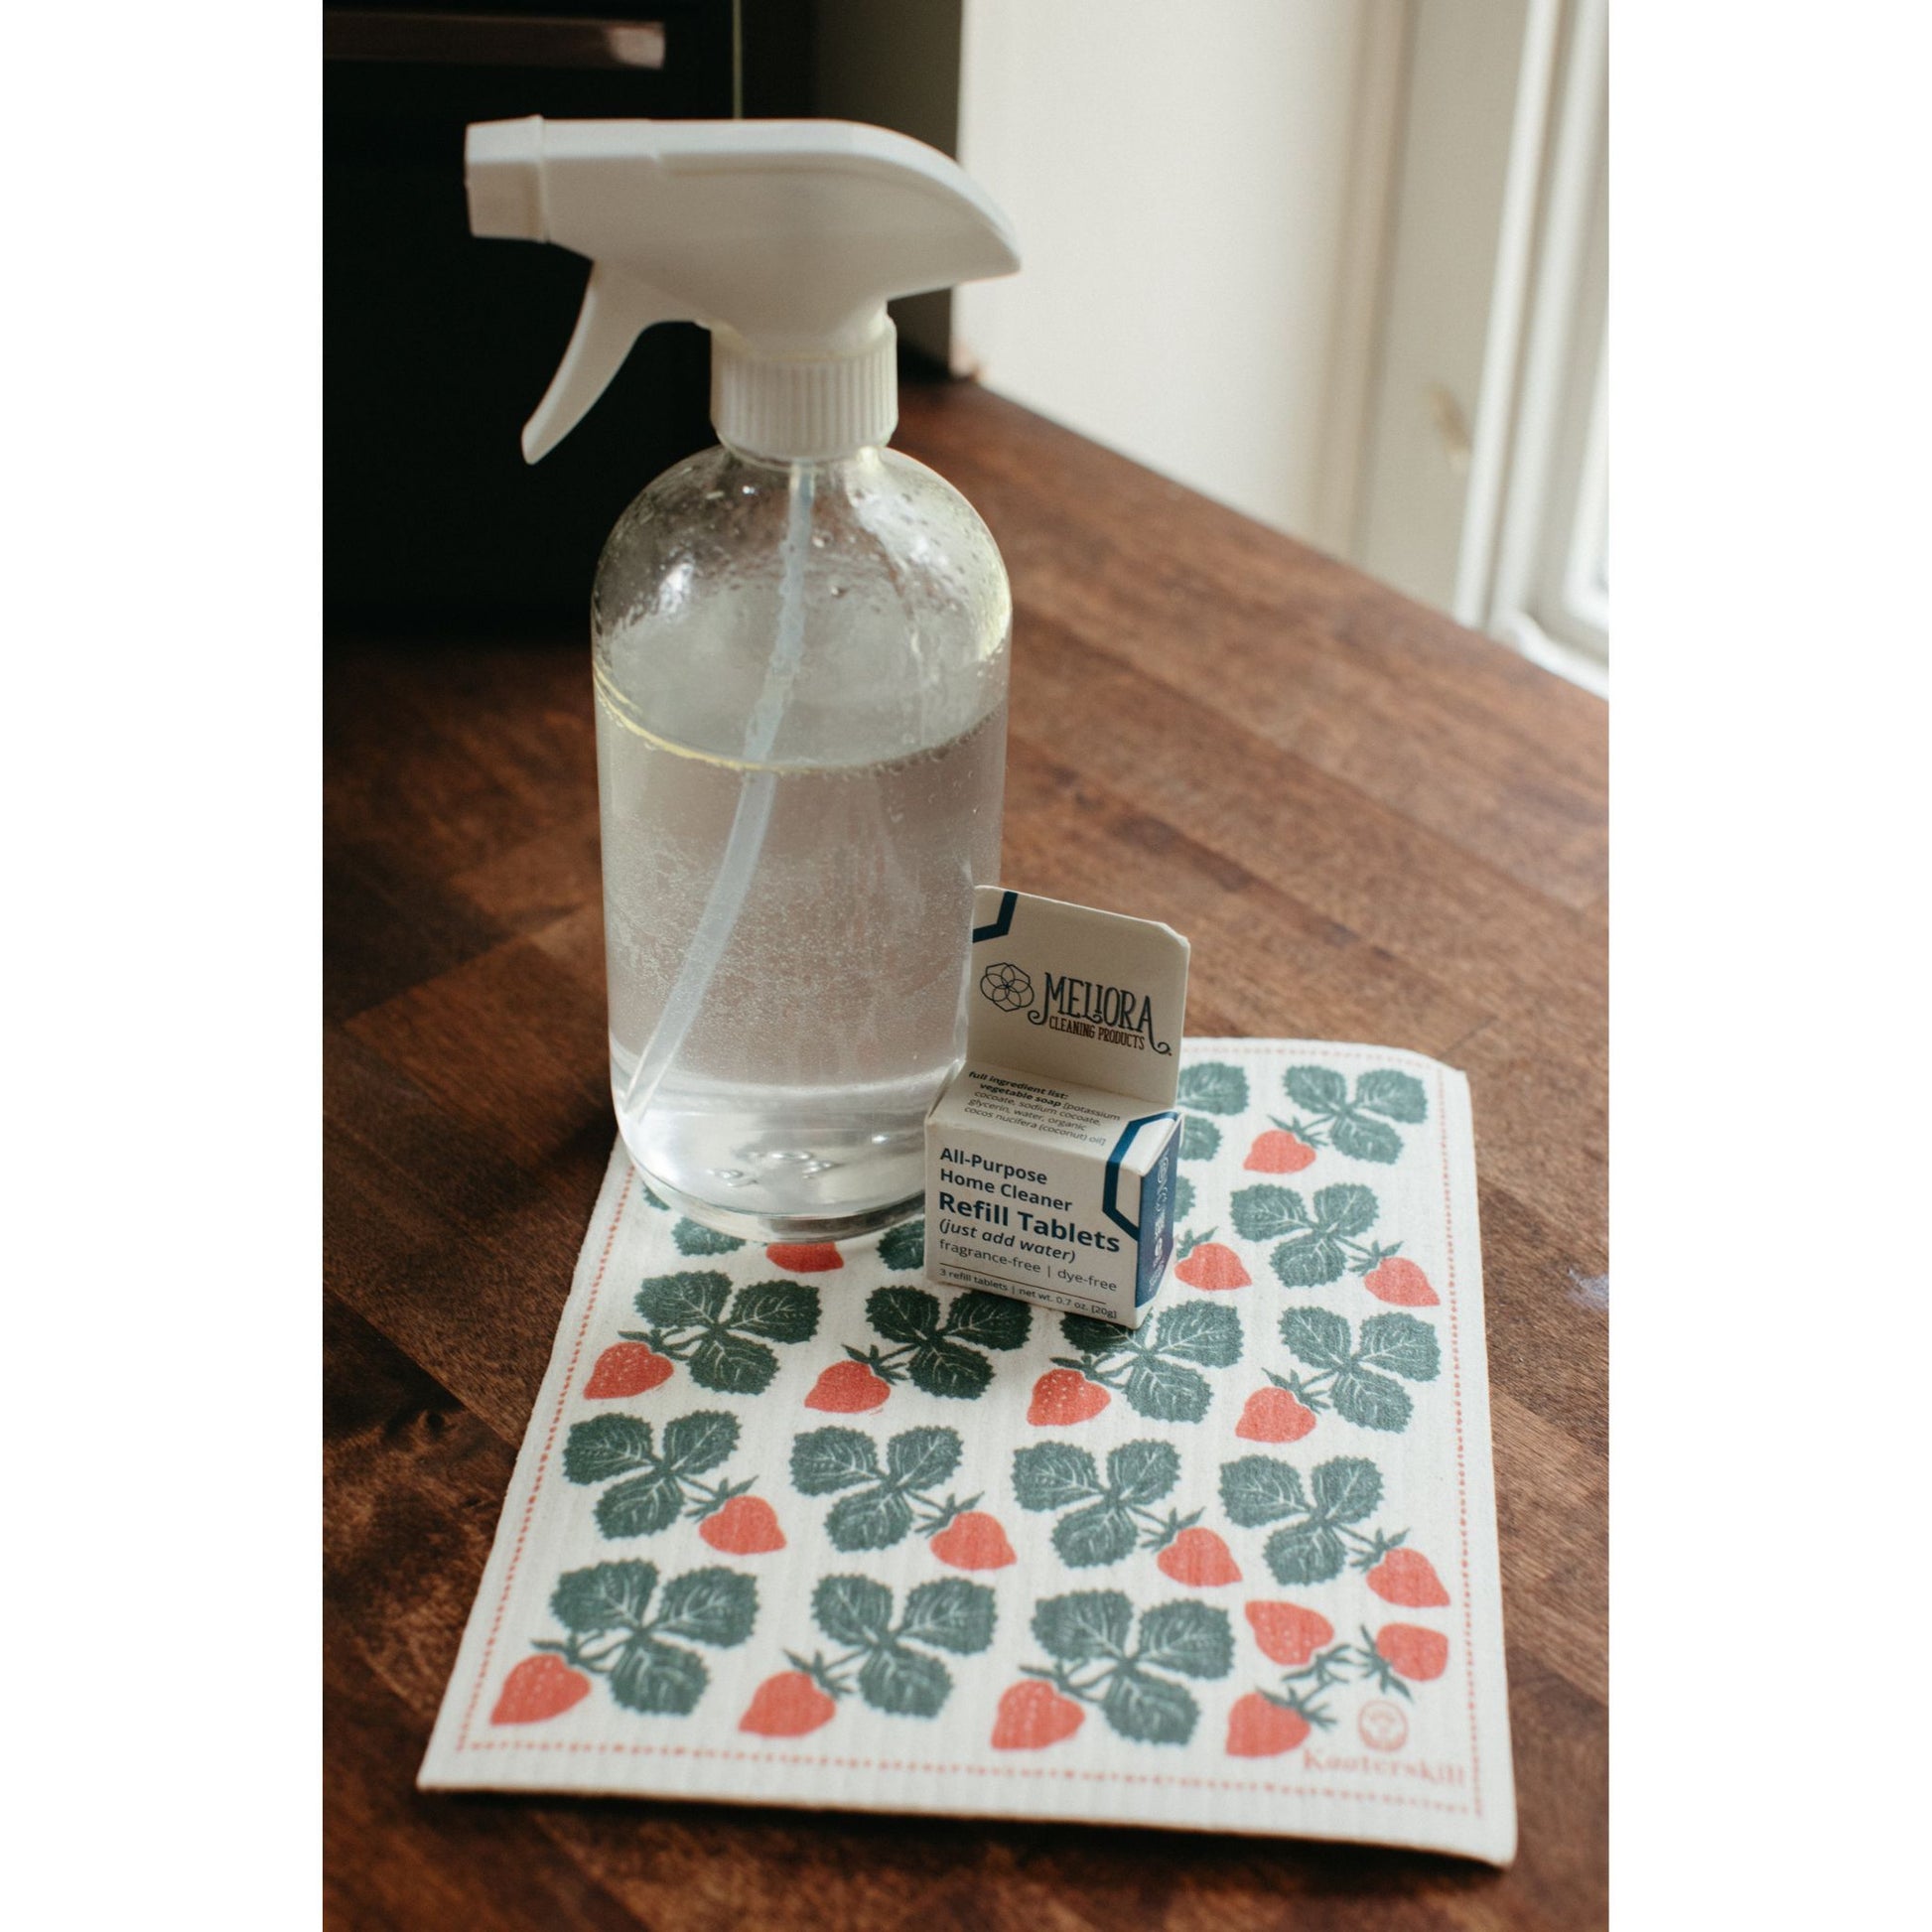 box of water-dissolvable all-purpose home cleaning tablets shown with a reusable glass spray bottle and a dish cloth